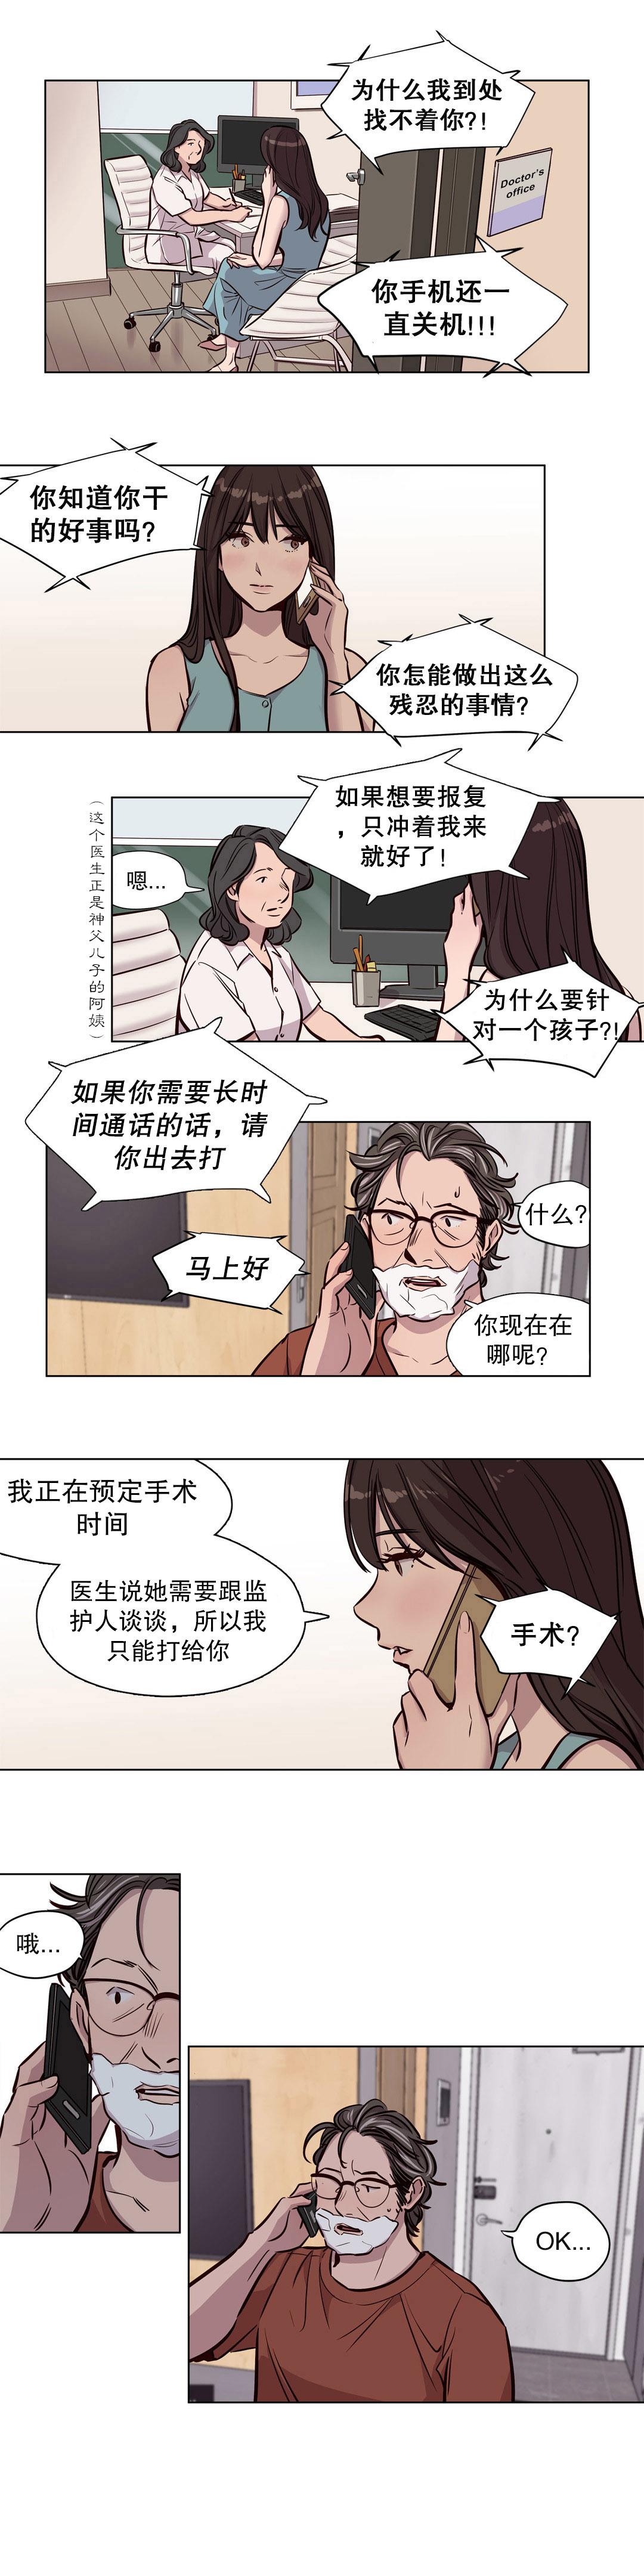 [Ramjak] 赎罪营(Atonement Camp) Ch.50-52 (Chinese) 2